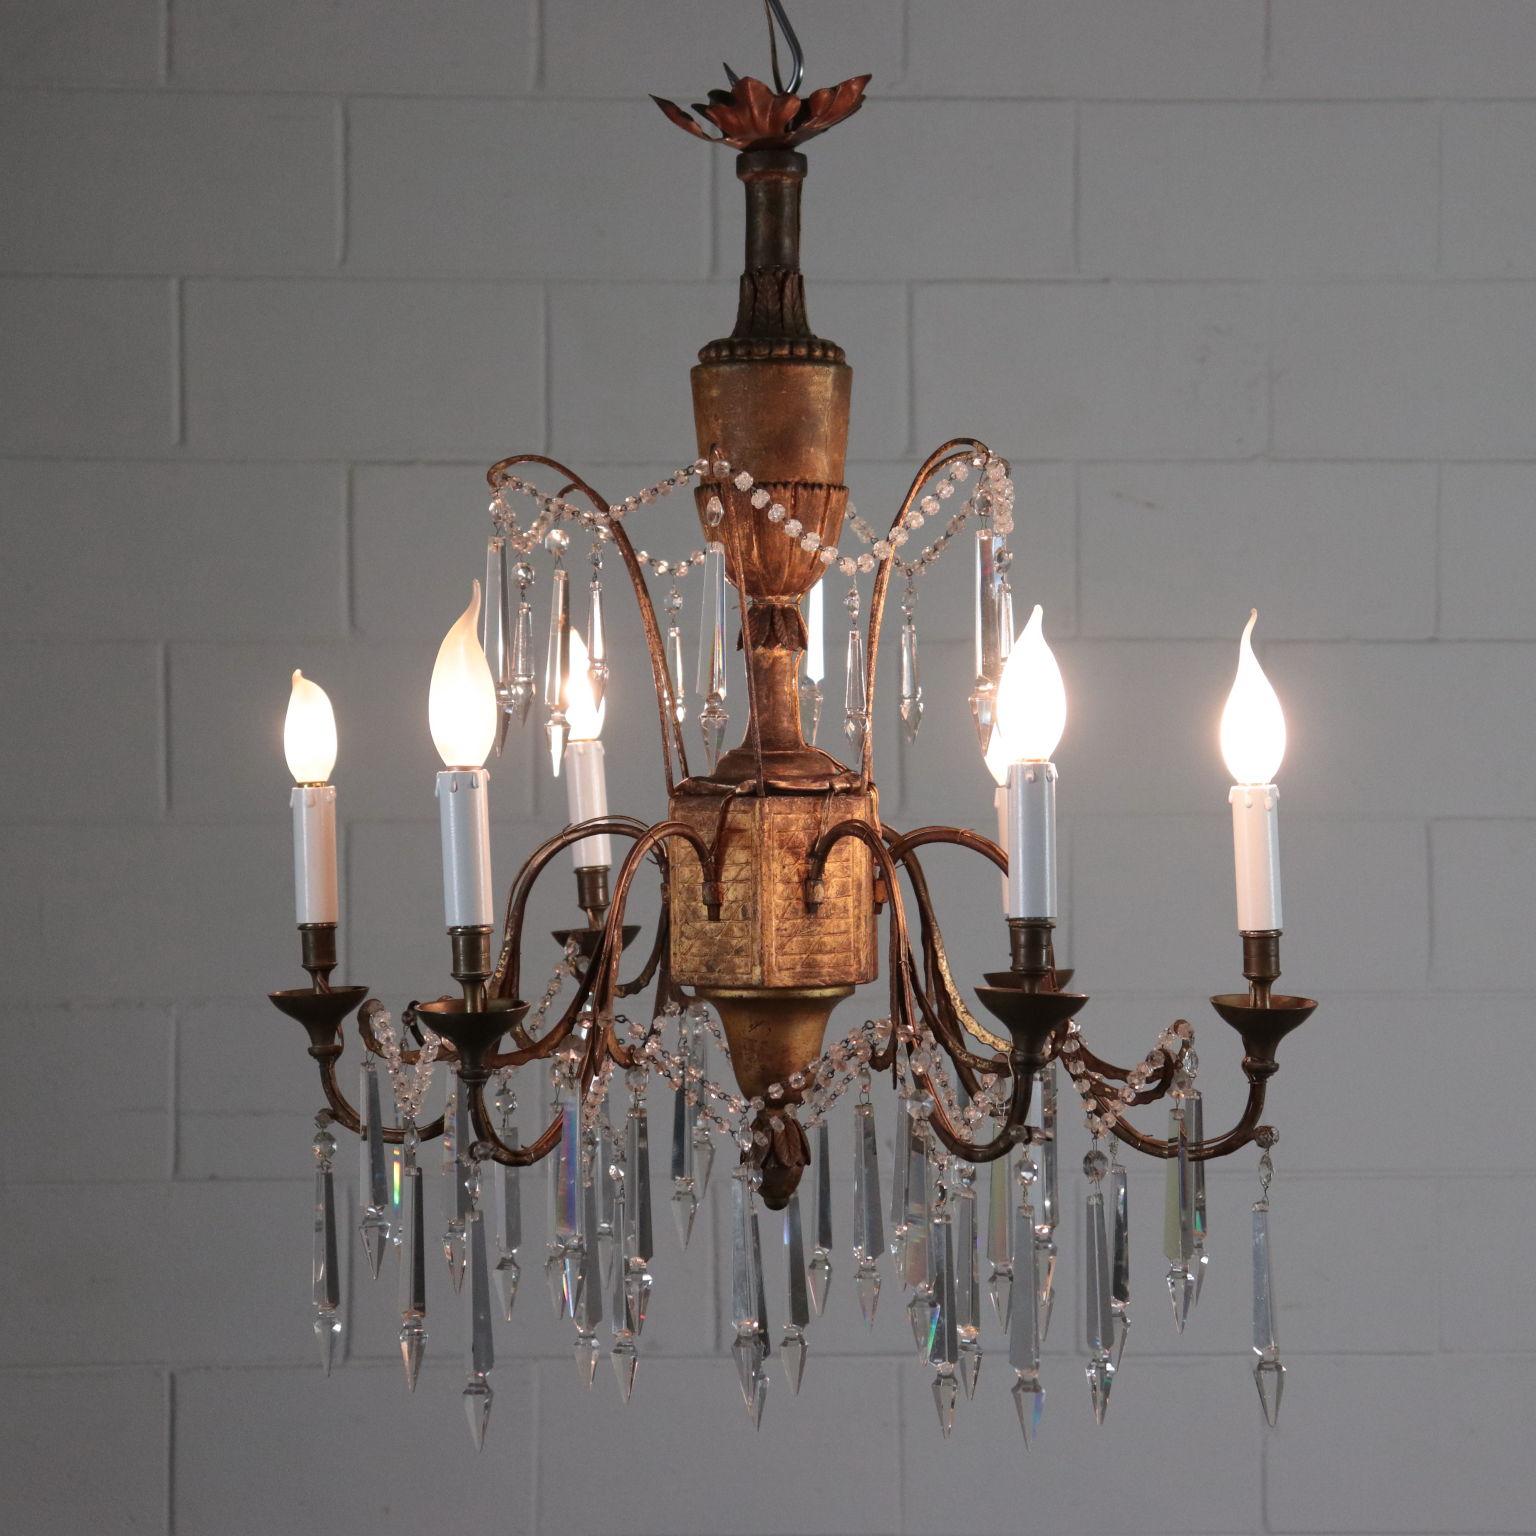 Italian Neoclassical Chandelier, Carved Wood and Wrought Iron, Italy, 18th Century